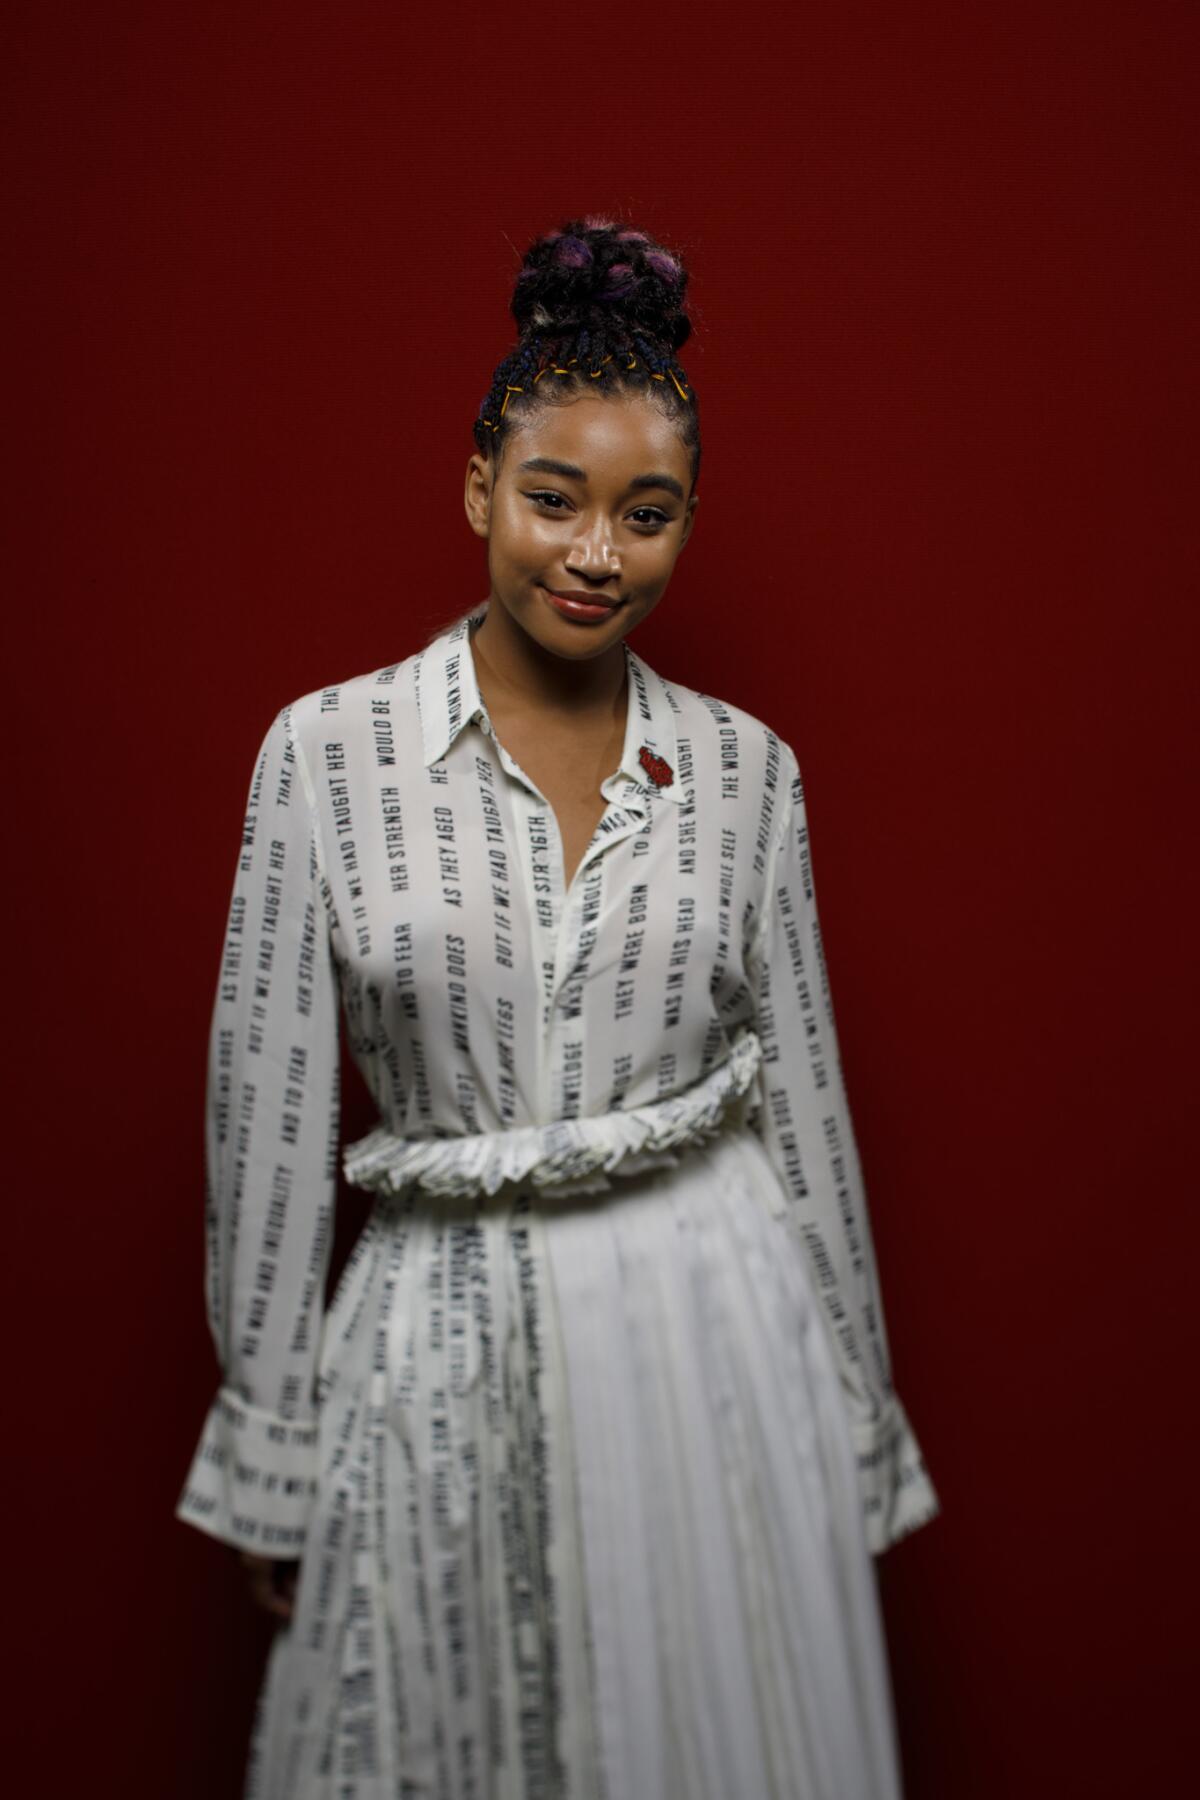 Amandla Stenberg from the television series "The Darkest Minds."